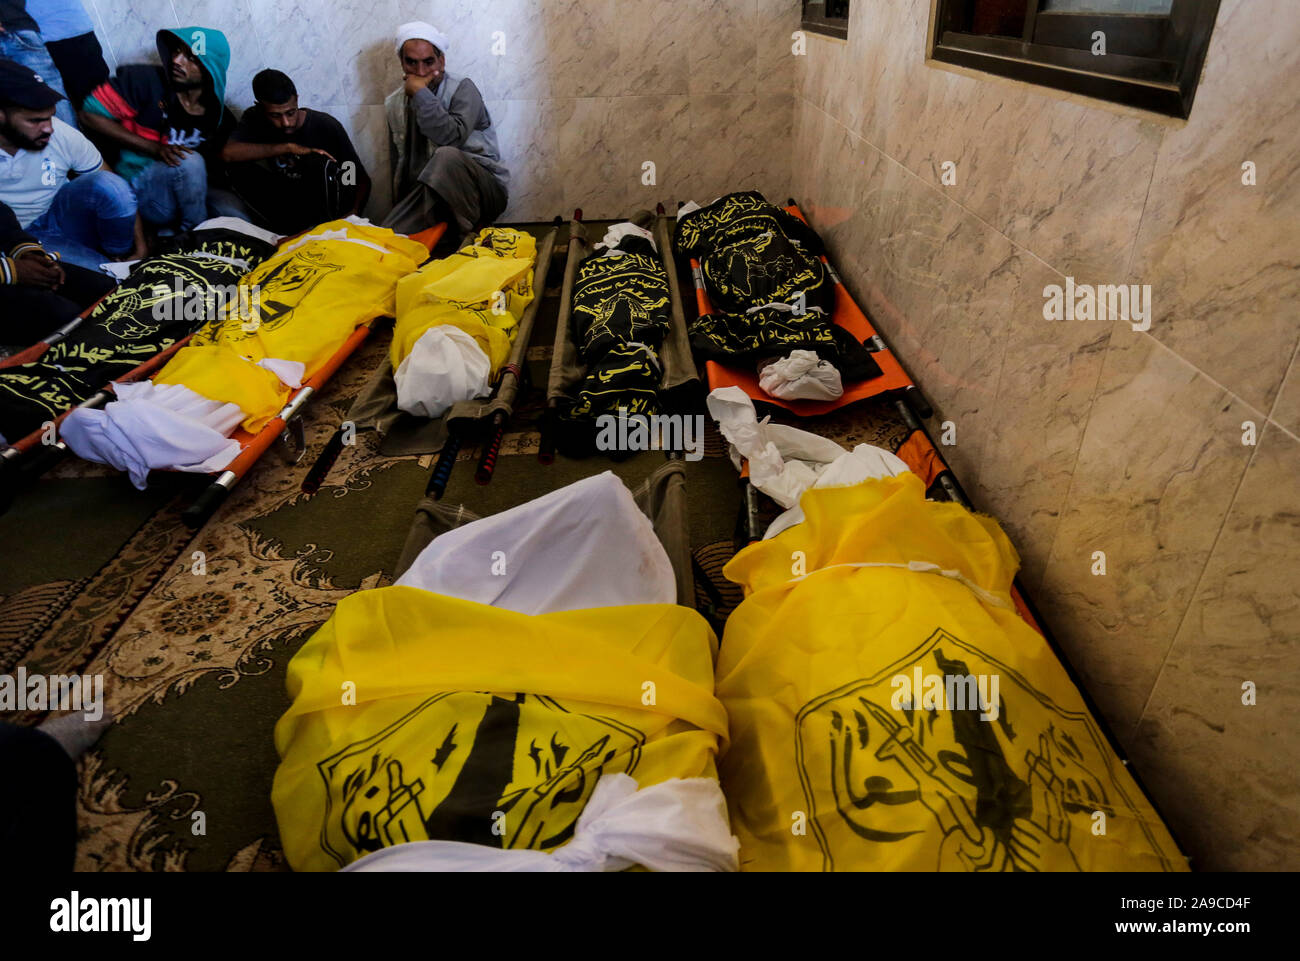 (EDITOR’S NOTE: Image depicts death)Palestinian mourners next to the bodies of Rasmi Abu Malhous and seven members of his family during their funeral at a mosque in Deir al-Balah, central Gaza Strip. The deceased were killed in an overnight Israeli missile strike that targeted their house. Stock Photo